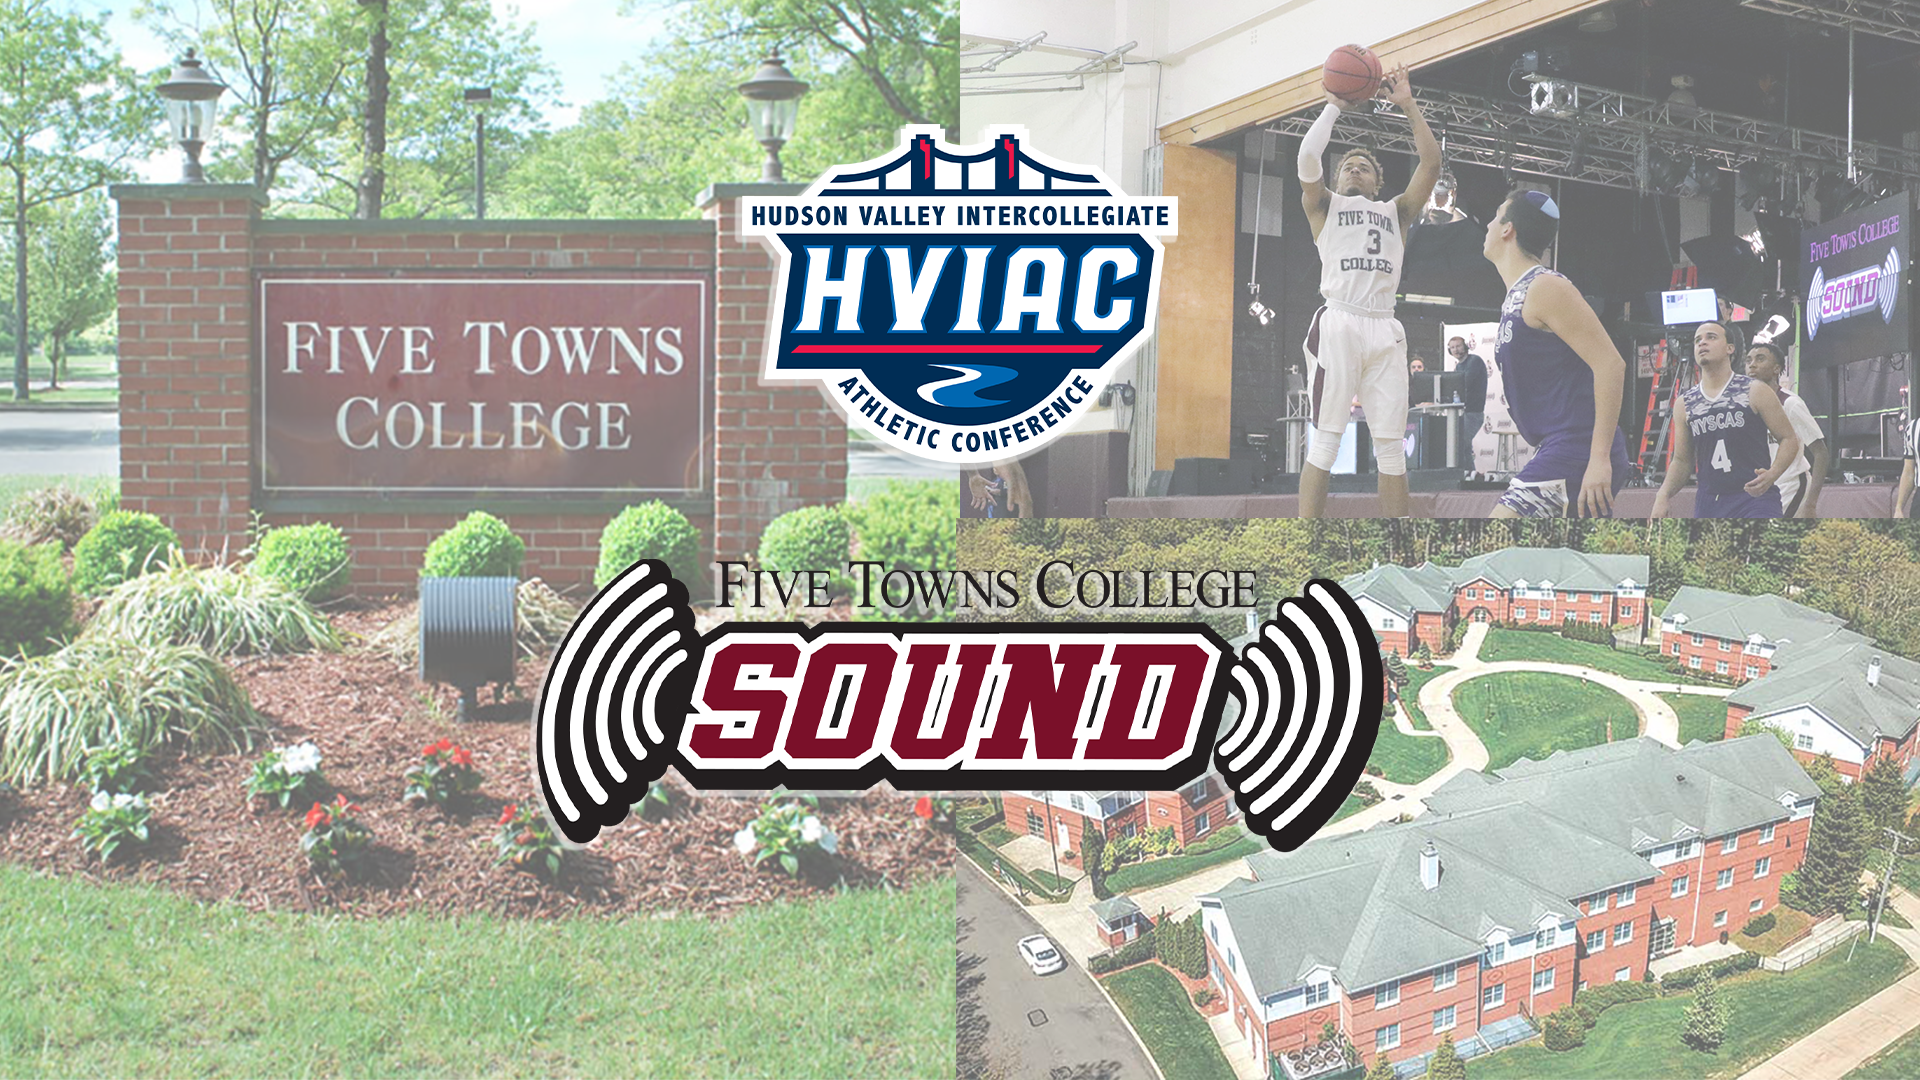 Five Towns College Joins HVIAC for 2019-20 Season